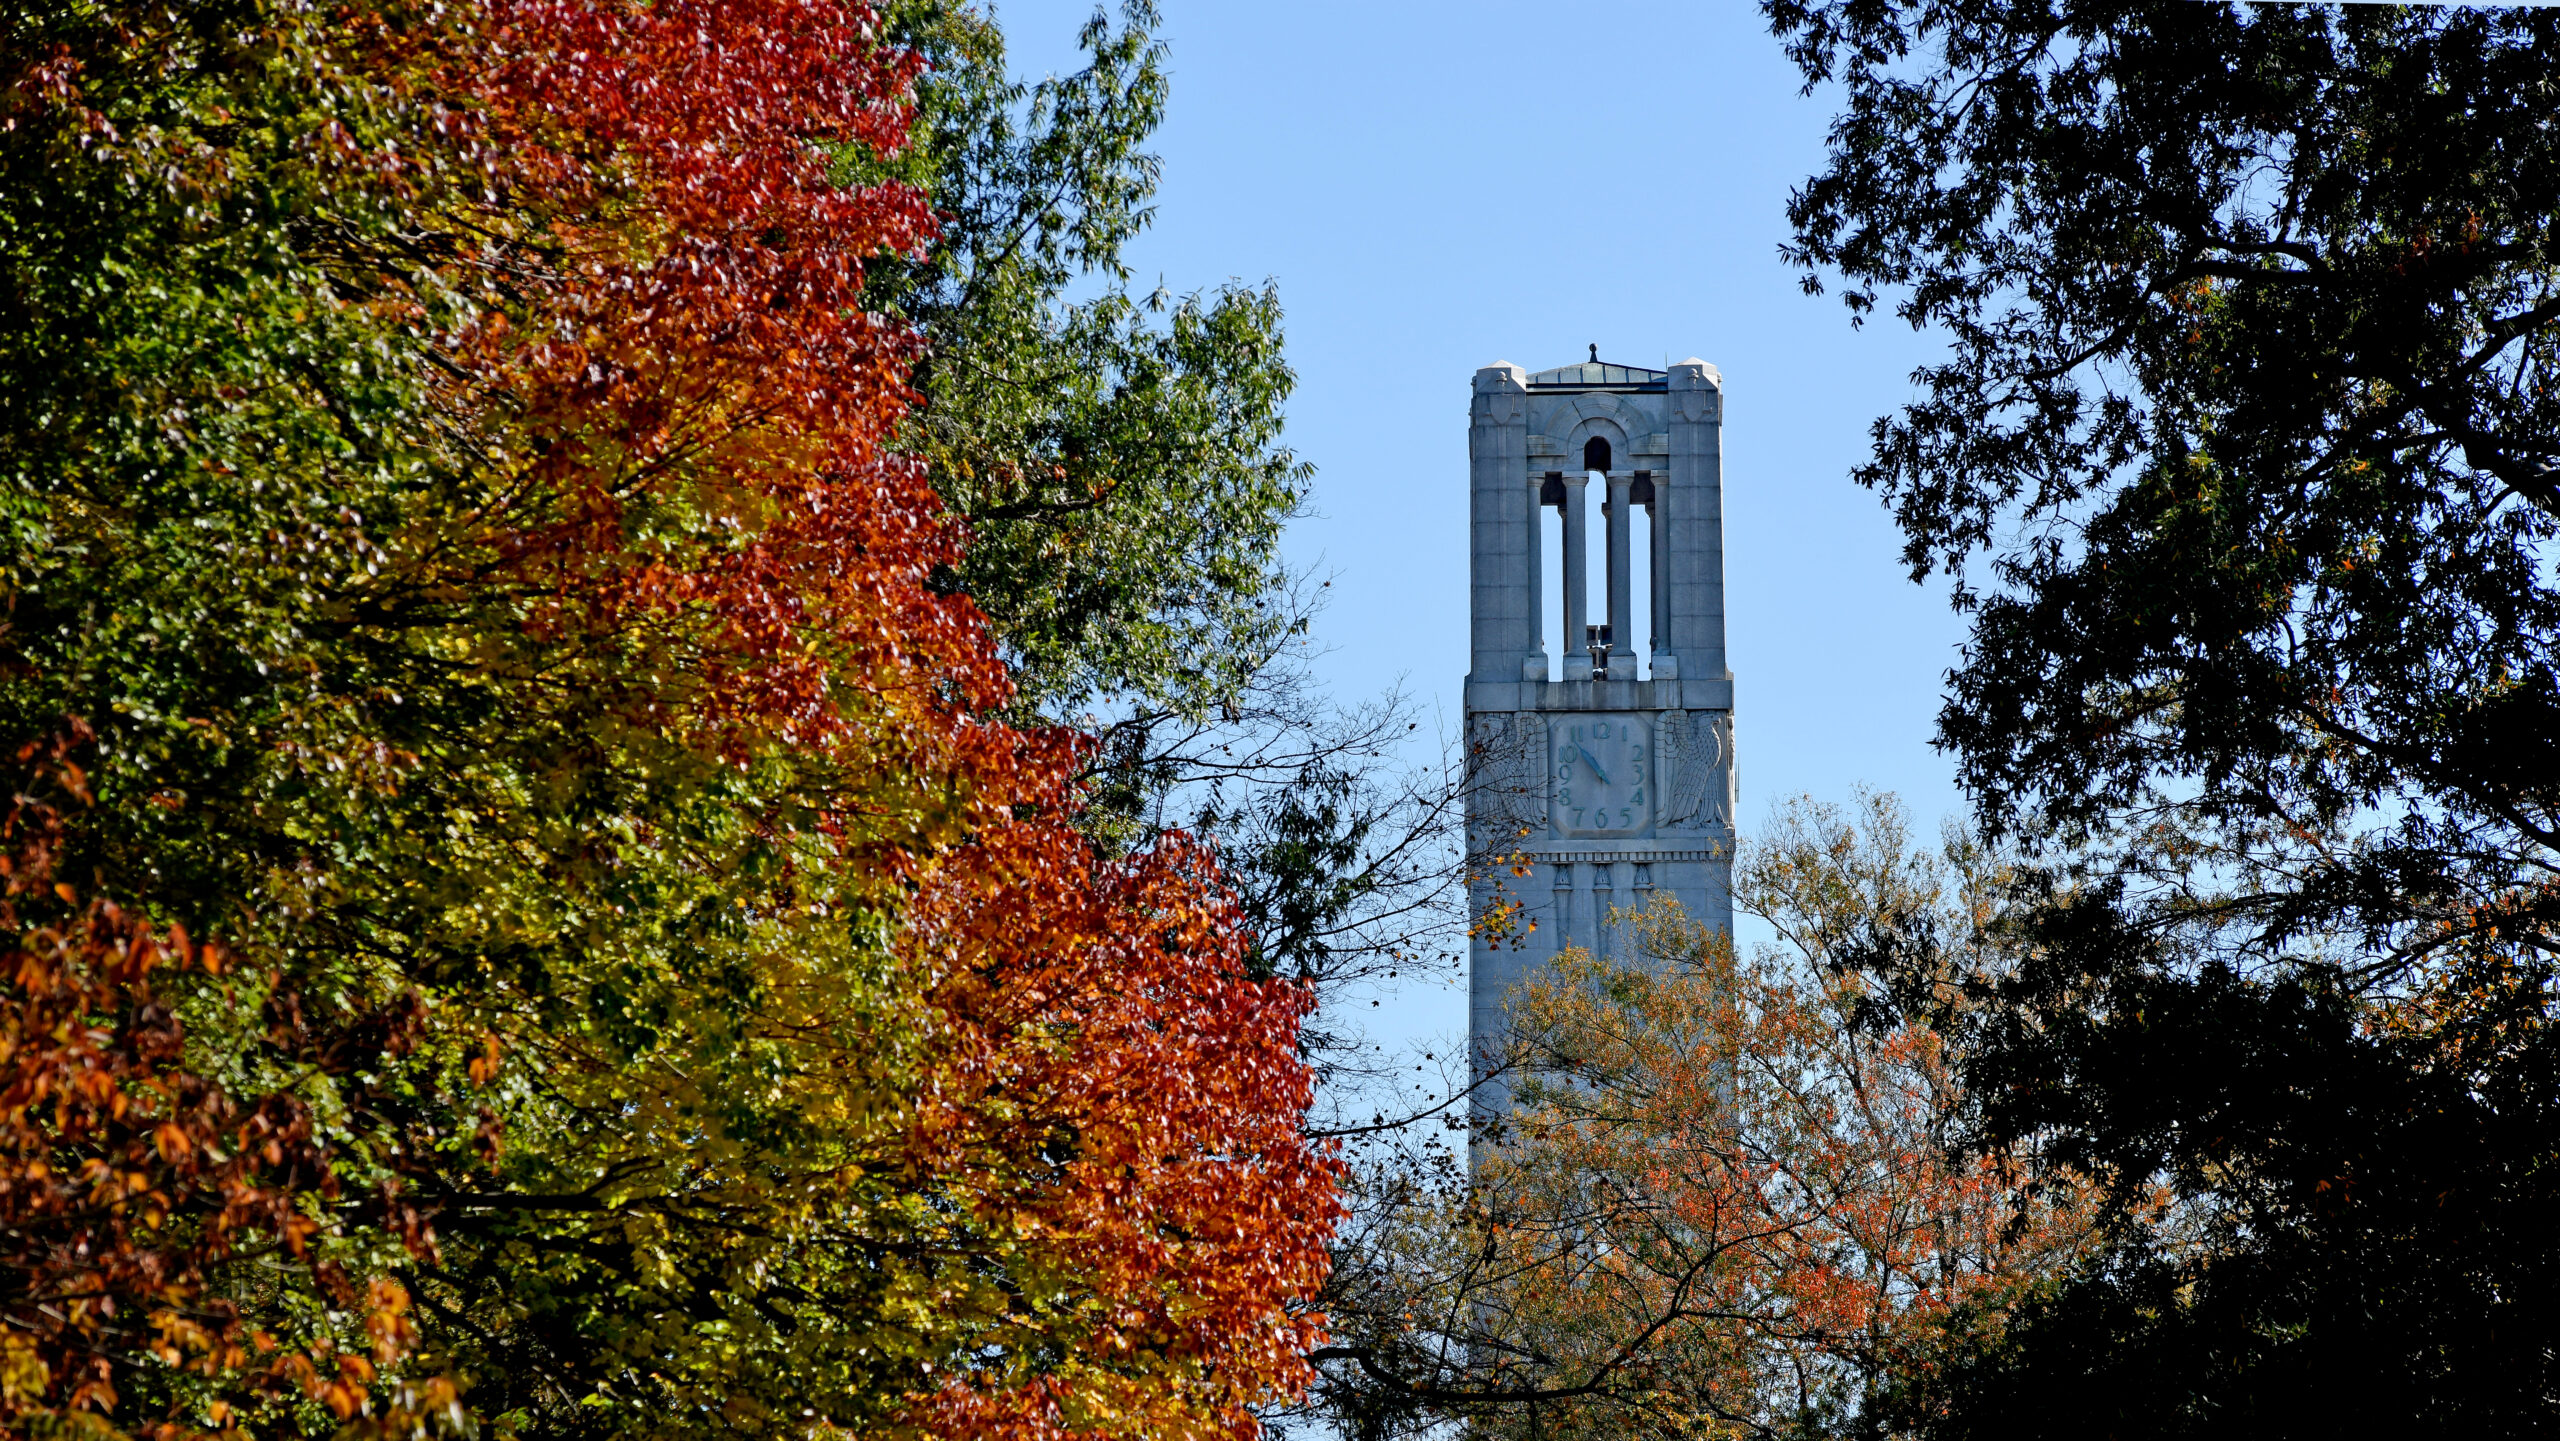 Trees burst with fall color on Court of North Carolina, with the Belltower in the background.